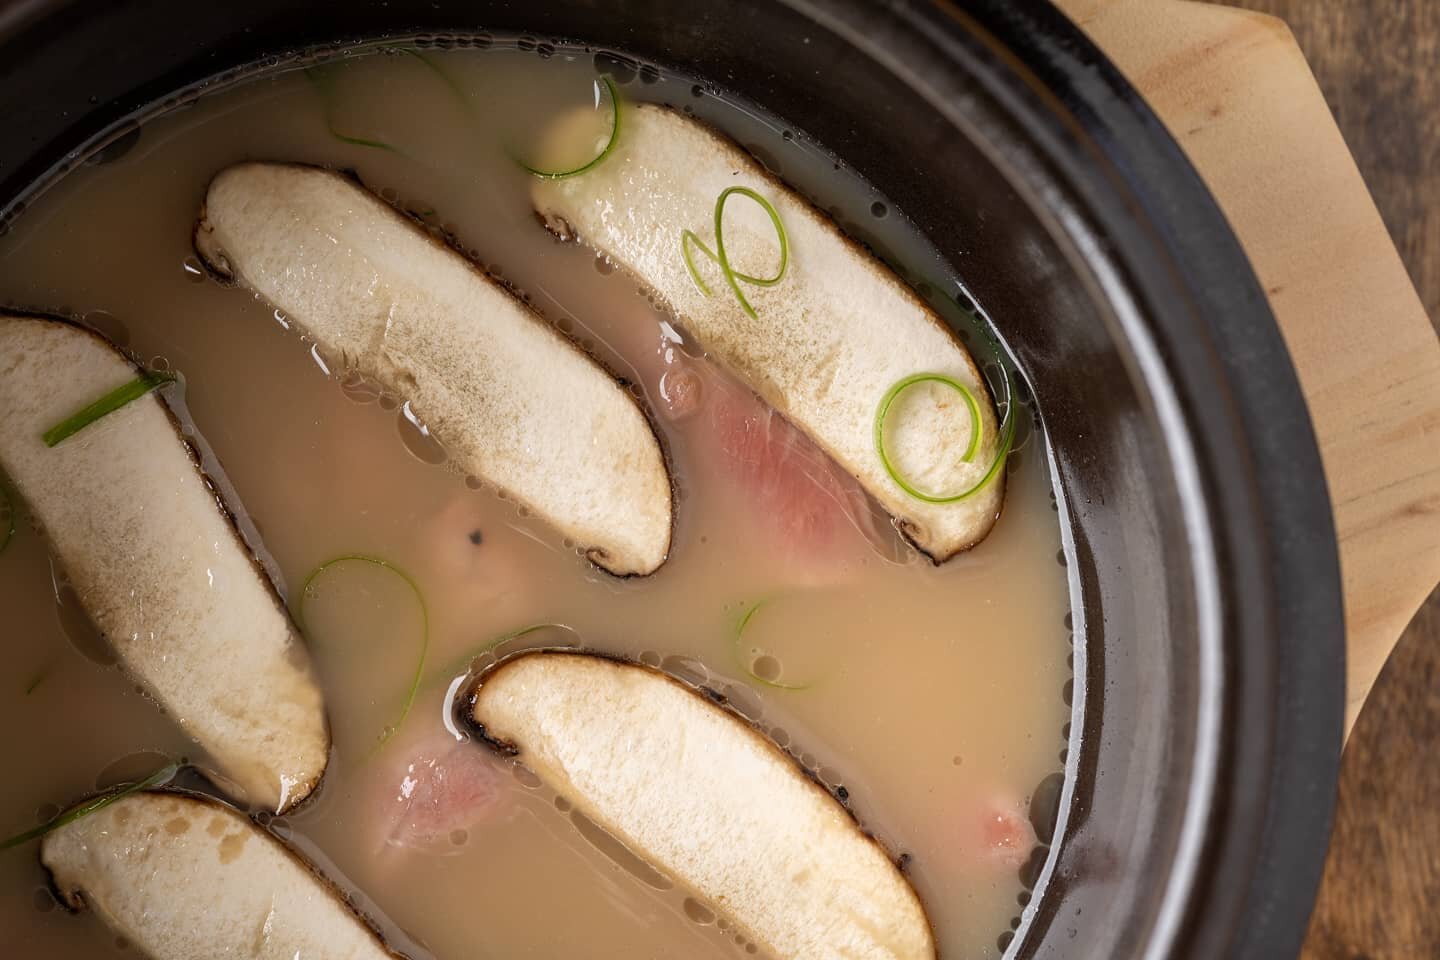 This might be one of the most comforting courses on our latest tasting menu. &thinsp;
&thinsp;
Our seolleongtang course is a beautiful bone broth that cooks over 4 days that is served with poached ribeye, shitake mushrooms and scallions. &thinsp;
&th